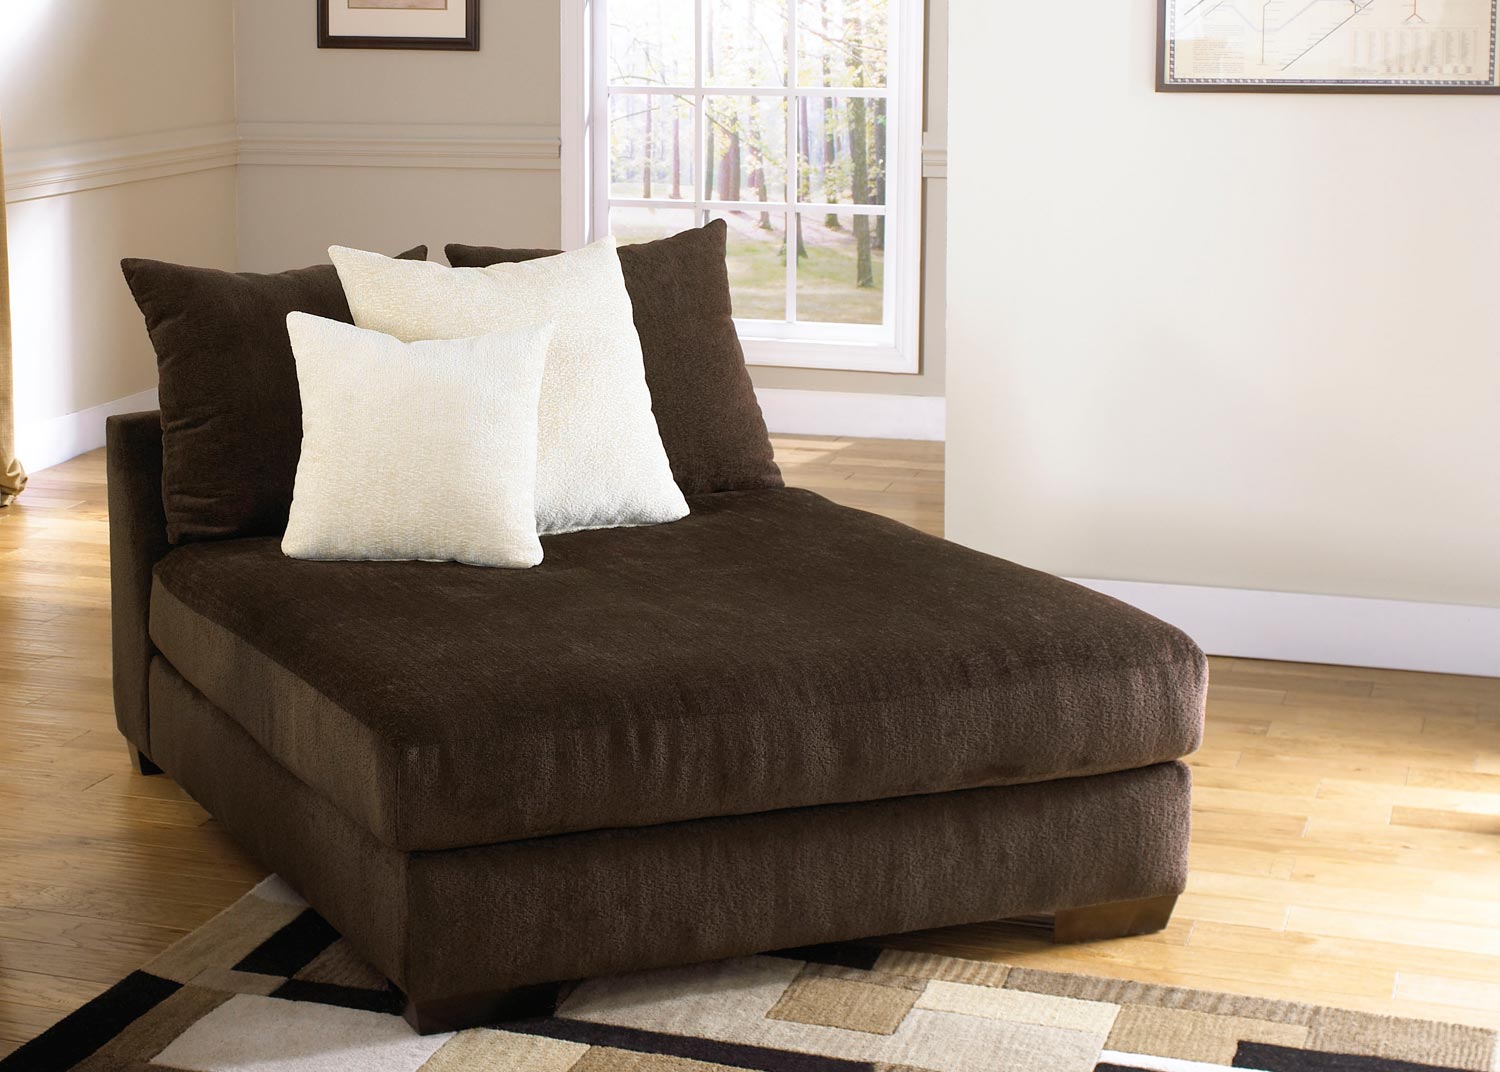 Jackson Axis Daybed - Chocolate